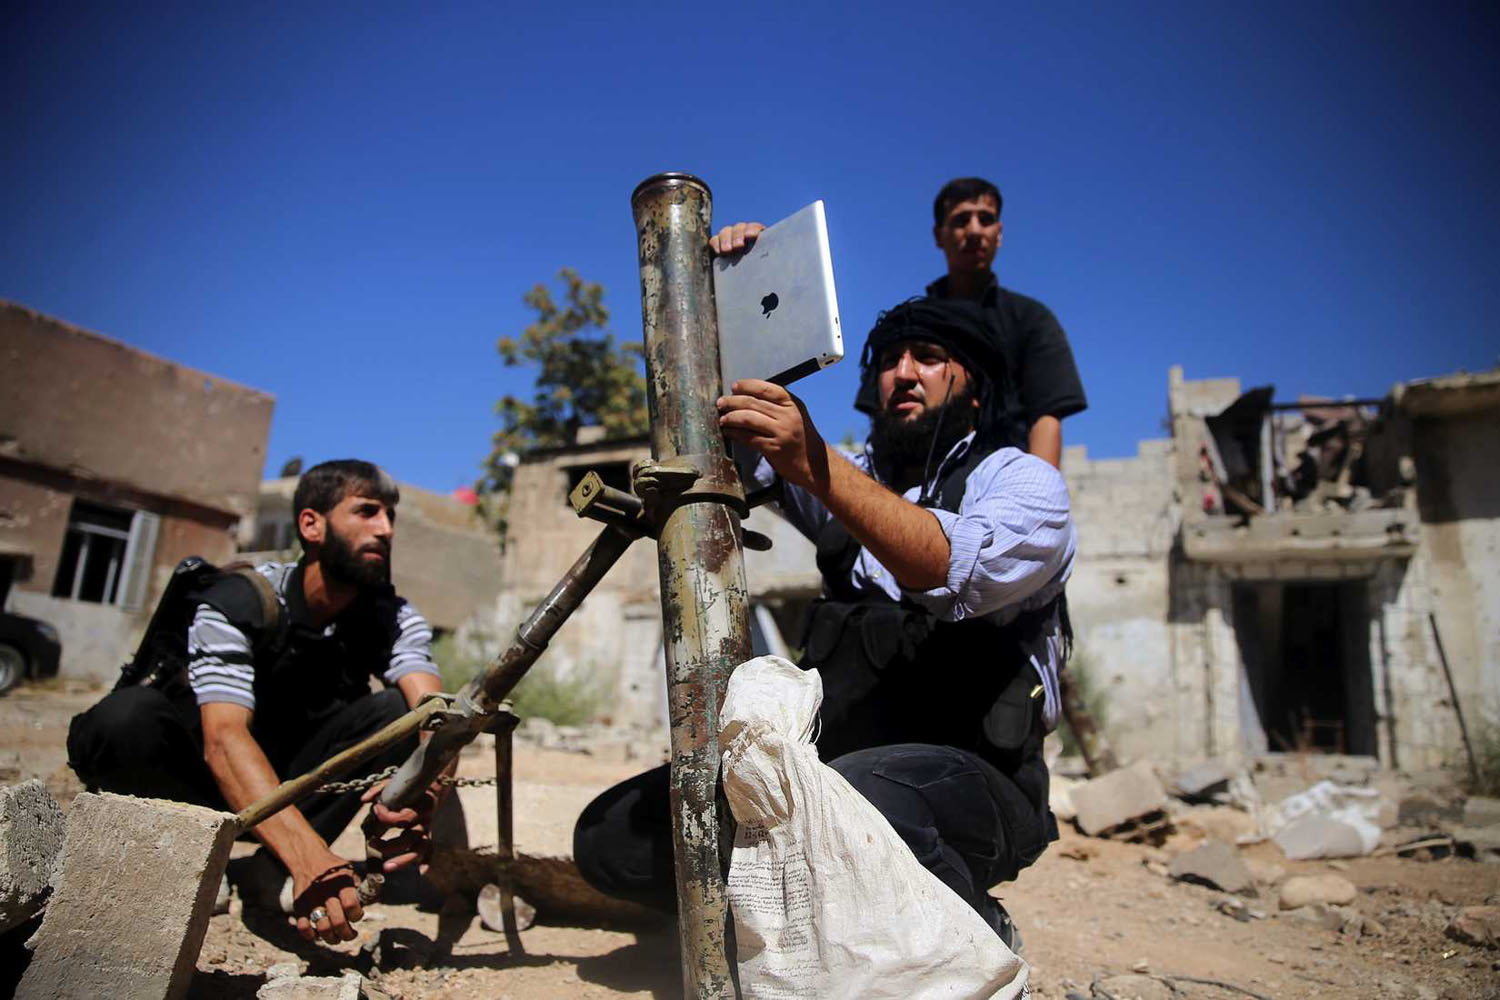 A rebel fighter, who belongs to the Free Syrian Army, uses an iPad during preparations to fire a homemade mortar at a battlefront in Damascus on Sept. 15, 2013 (Mohamed Abdullah / Reuters)